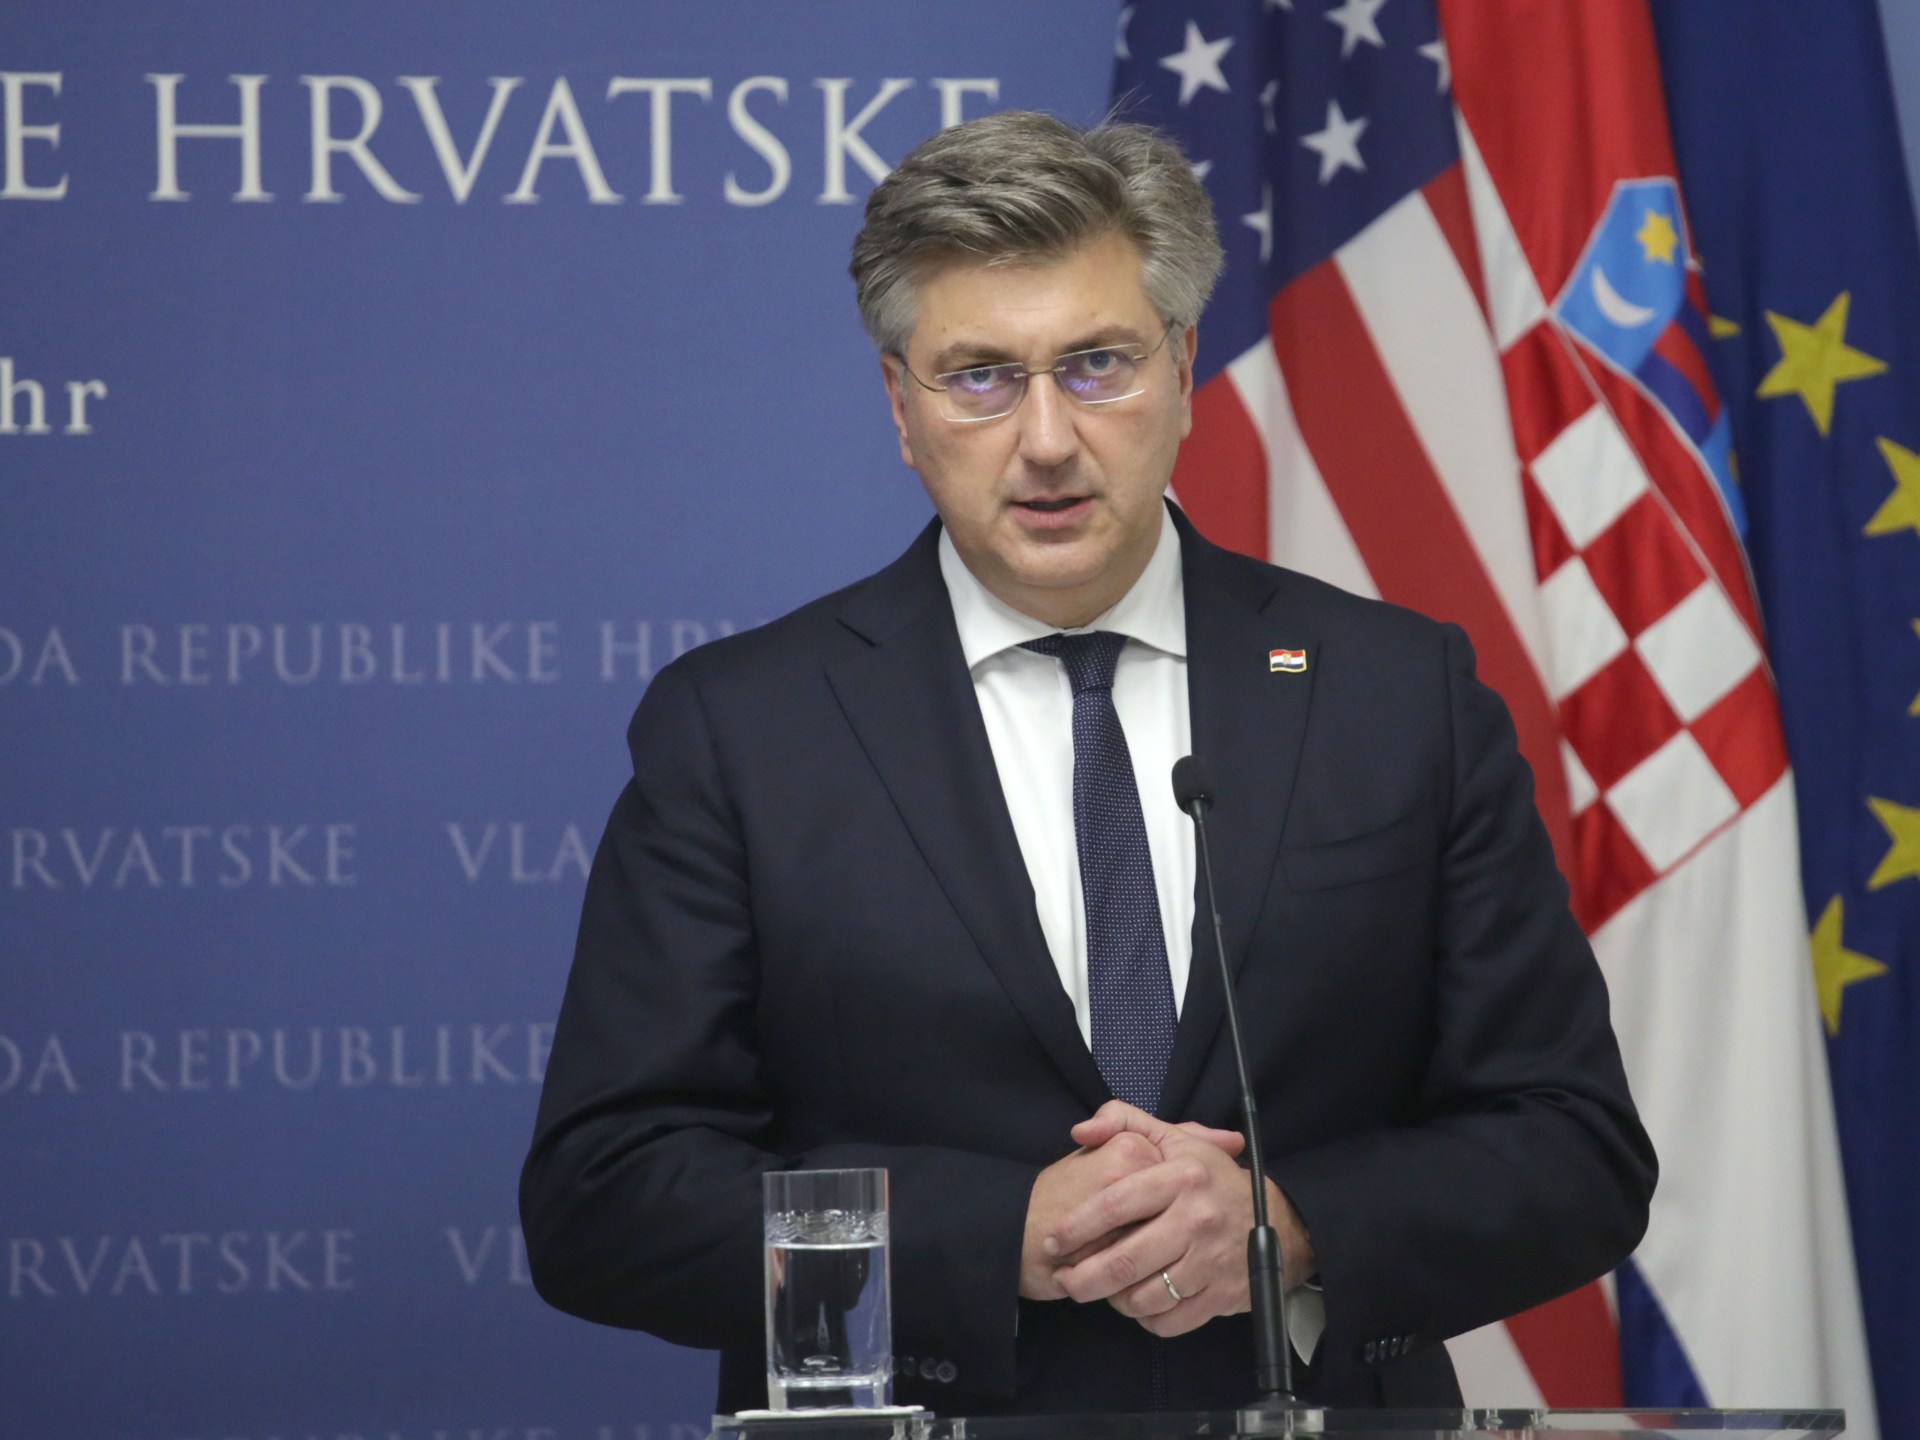 PM Plenkovic on whether Russia has any leverage over Croatia